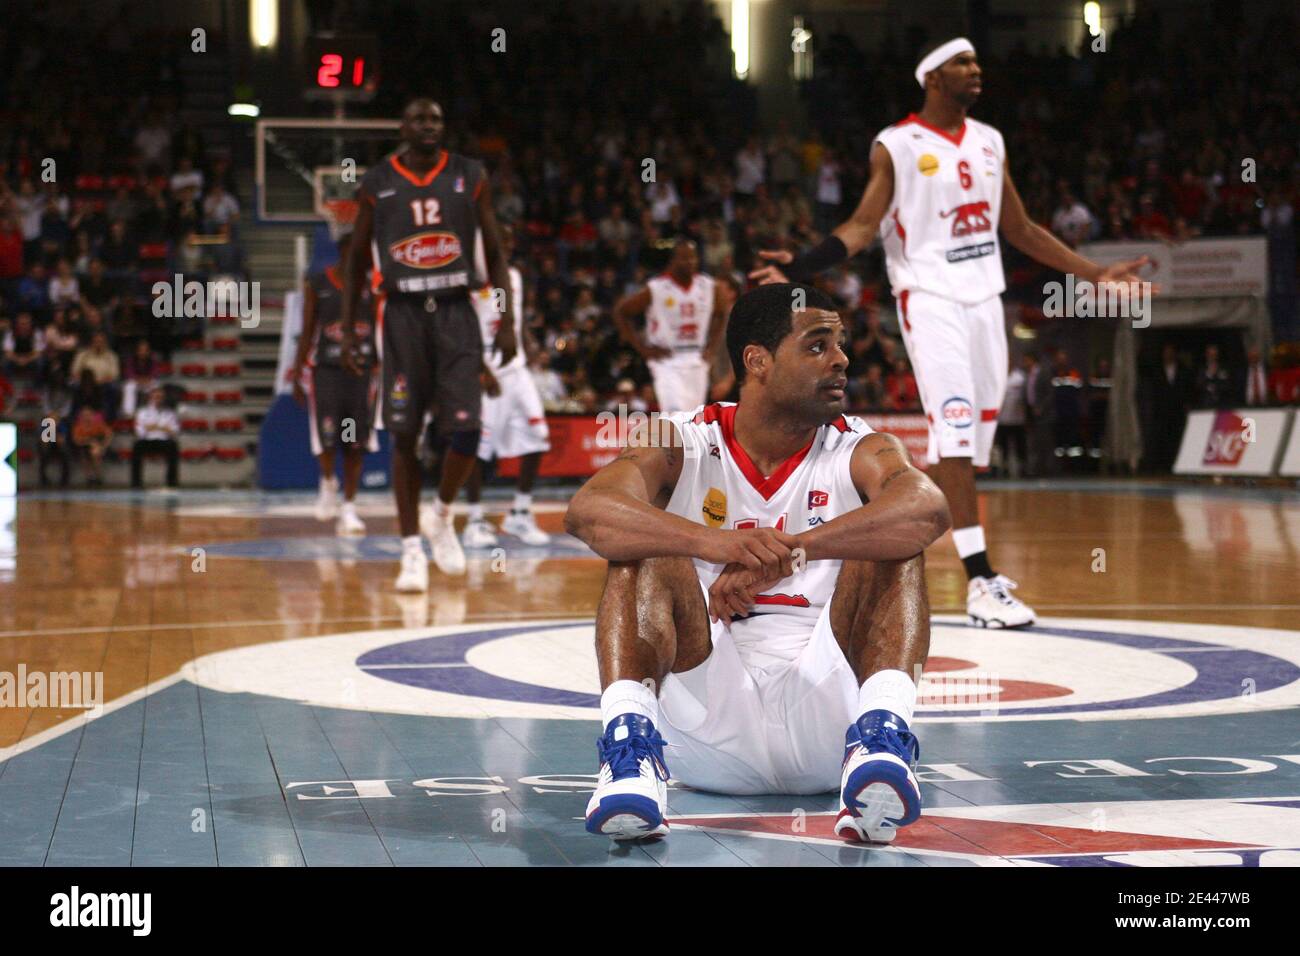 Nancy's Ricardo Greer during the French Pro A basketball match, SLUC Nancy vs MSB Le Mans at Jean Weille Hall in Nancy, France on on April 24, 2009. Photo by Mathieu Cugnot/ABACAPRESS.COM Stock Photo